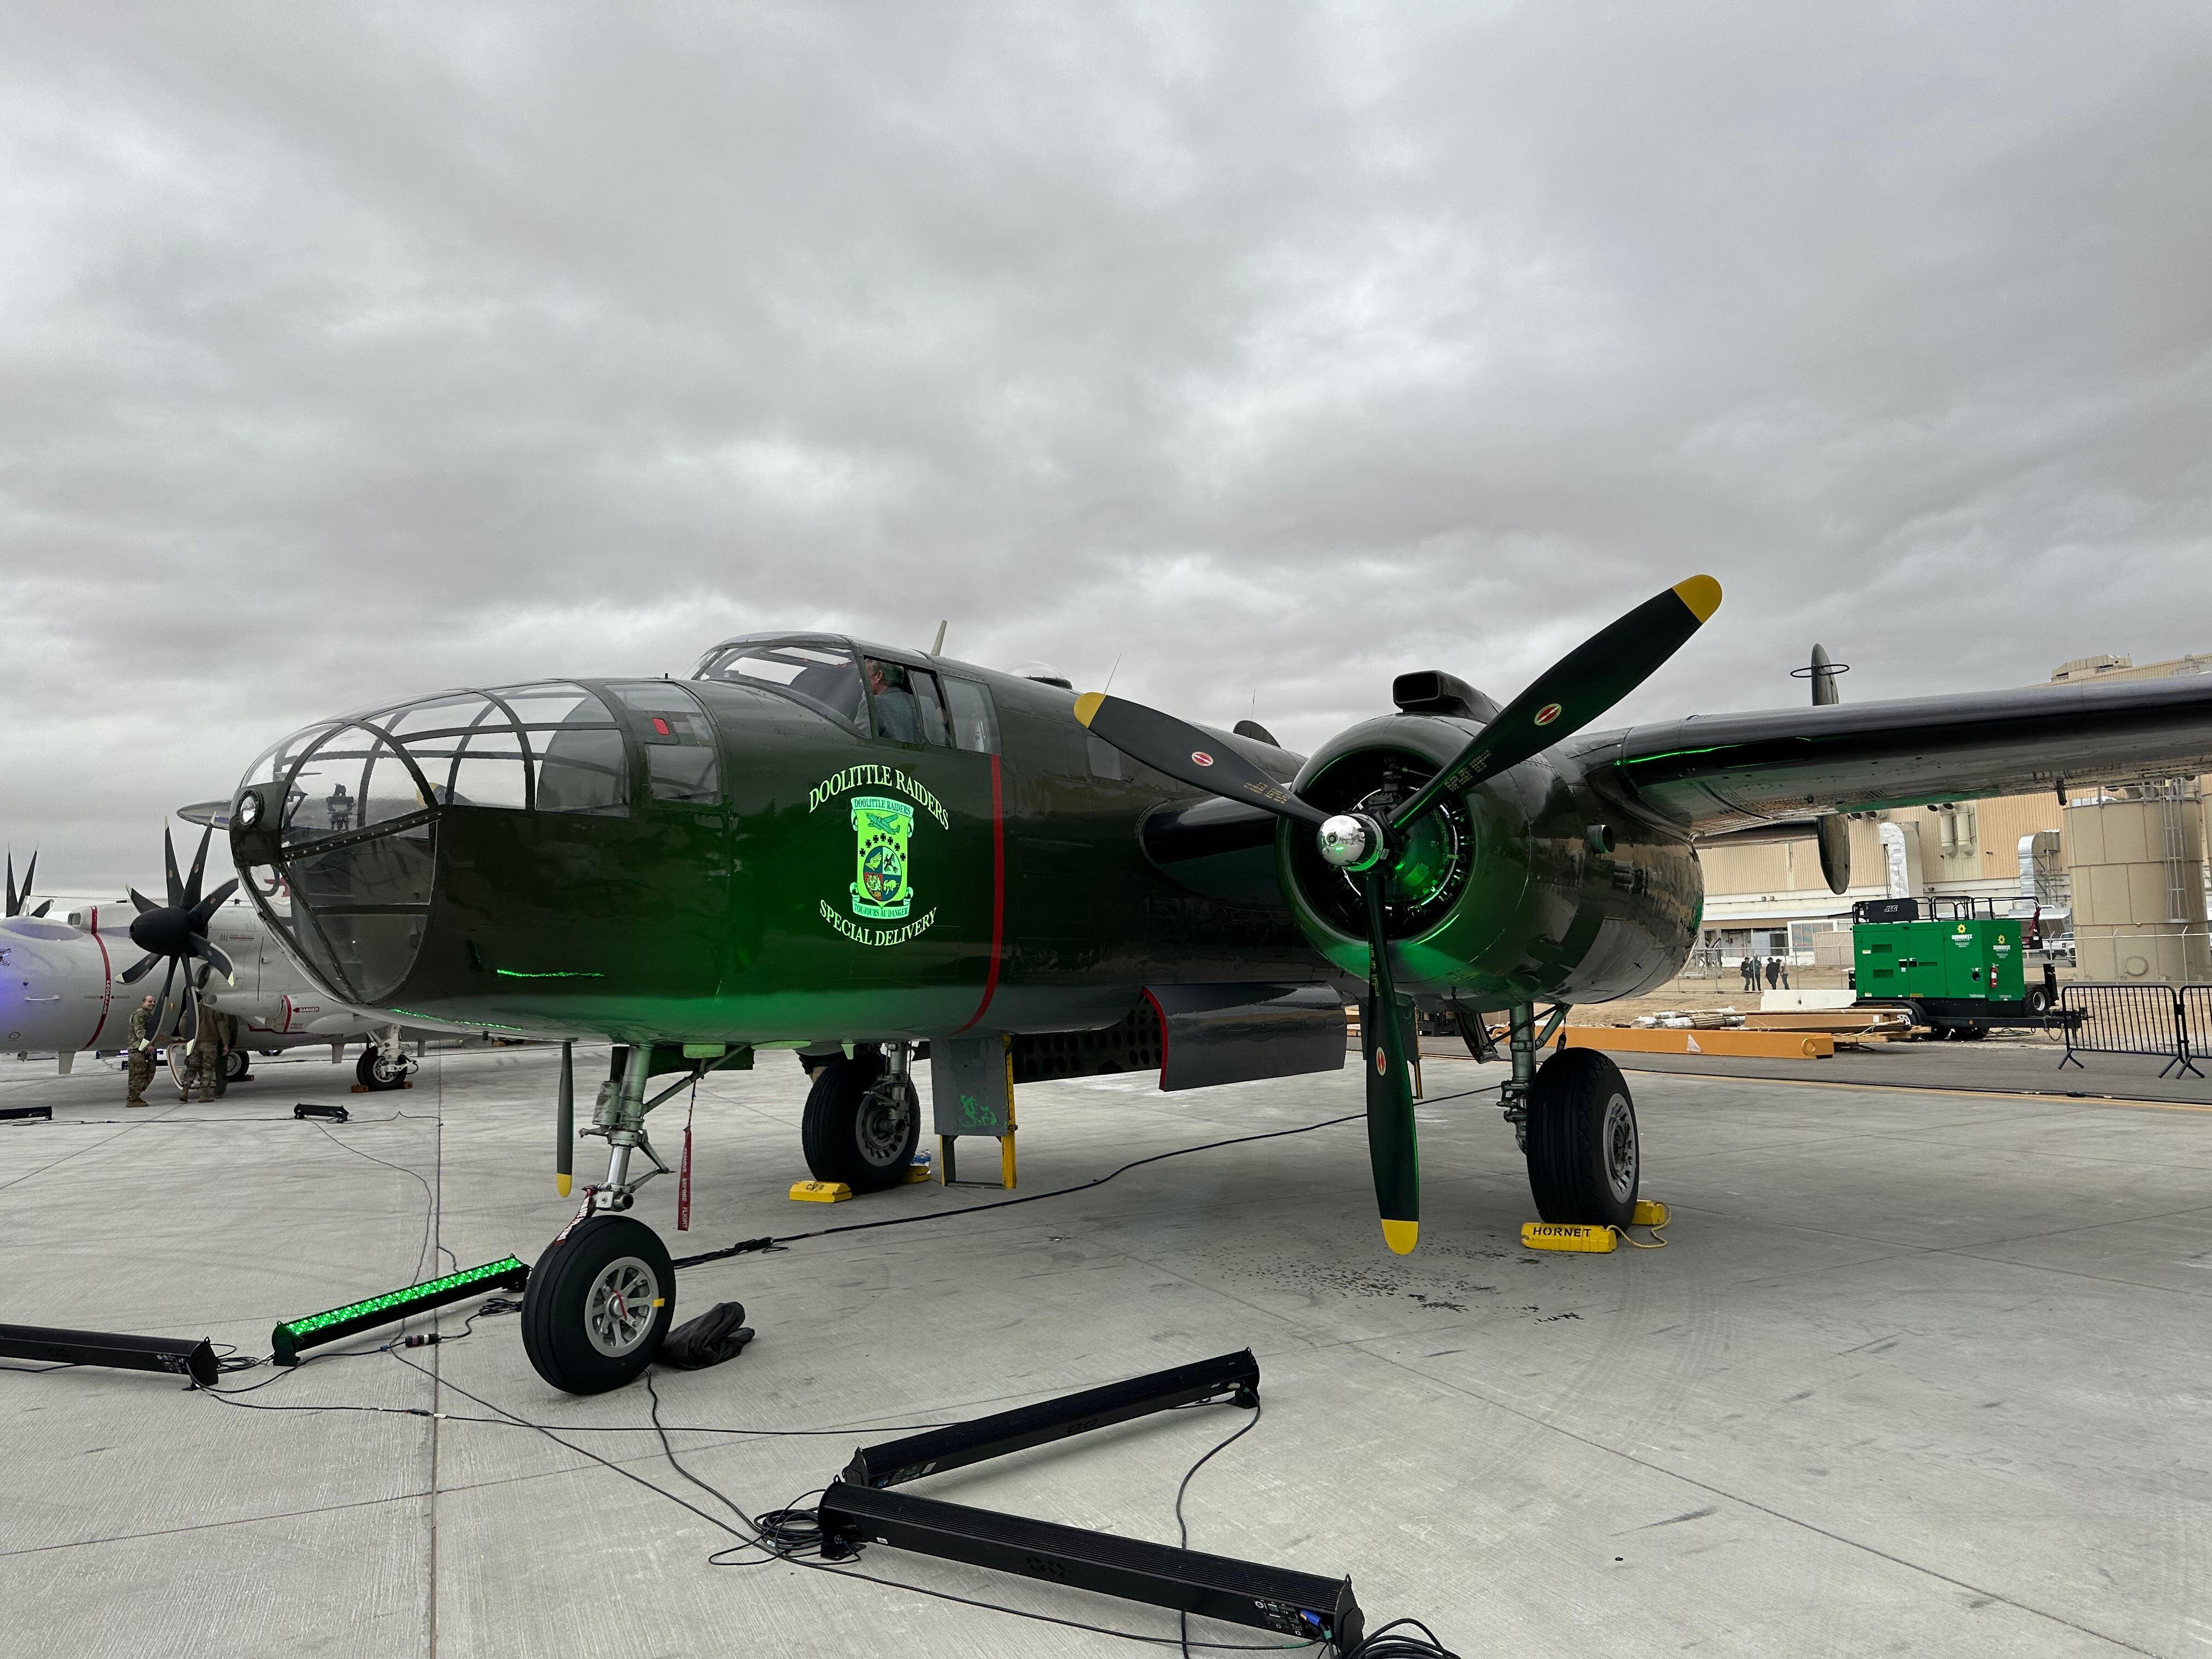 The B-25 Mitchell, a World War II-era bomber that was flown by the Doolittle Raiders in their daring 1942 raid on Tokyo, Japan. The B-21 Raider was named in honor of the Doolittle Raiders, and the rollout ceremony included tributes to them. (Stephen Losey/Staff)